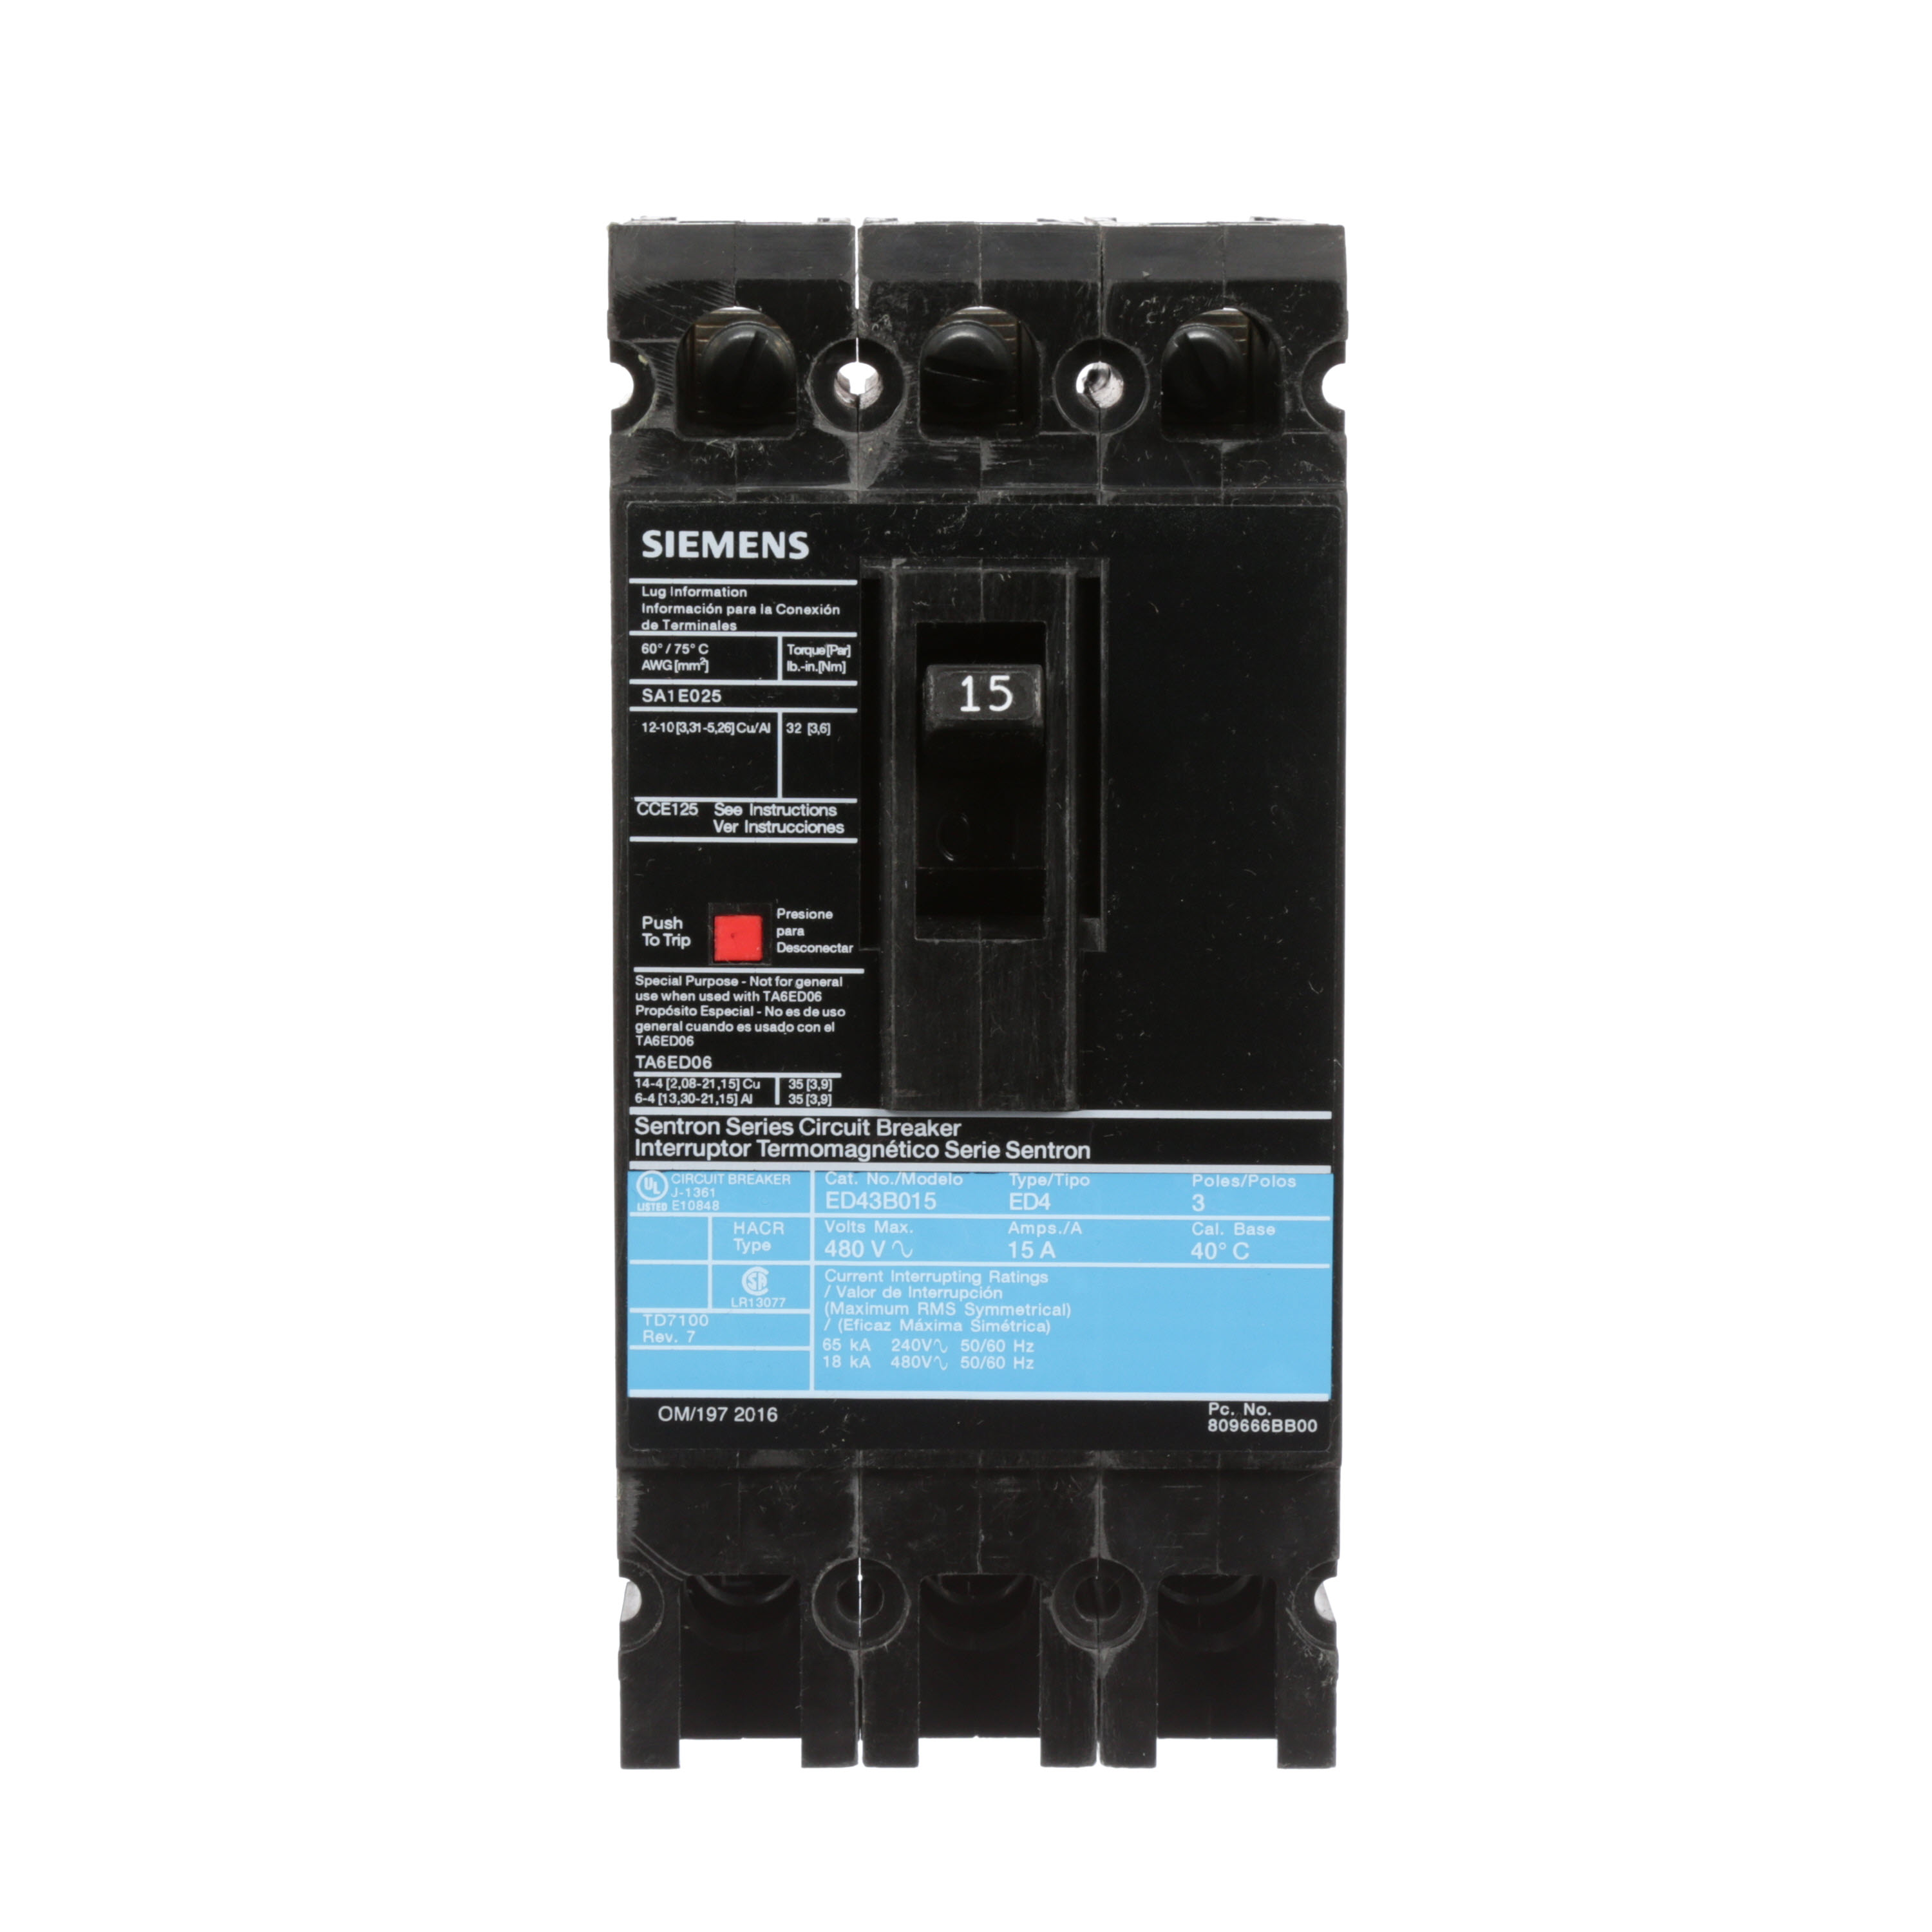 SIEMENS LOW VOLTAGE SENTRON MOLDED CASE CIRCUIT BREAKER WITH THERMAL - MAGNETICTRIP UNIT. STANDARD 40 DEG C BREAKER ED FRAME WITH STANDARD BREAKING CAPACITY. 15A 3-POLE (18KAIC AT 480V). NON-INTERCHANGEABLE TRIP UNIT. SPECIAL FEATURES LINE AND LOAD SIDE LUGS (SA1E025) WIRE RANGE 14 - 10AWG (CU) / 12 - 10AWG (AL). DIMENSIONS (W x H x D) IN 3.00 x 6.4 x 3.92.